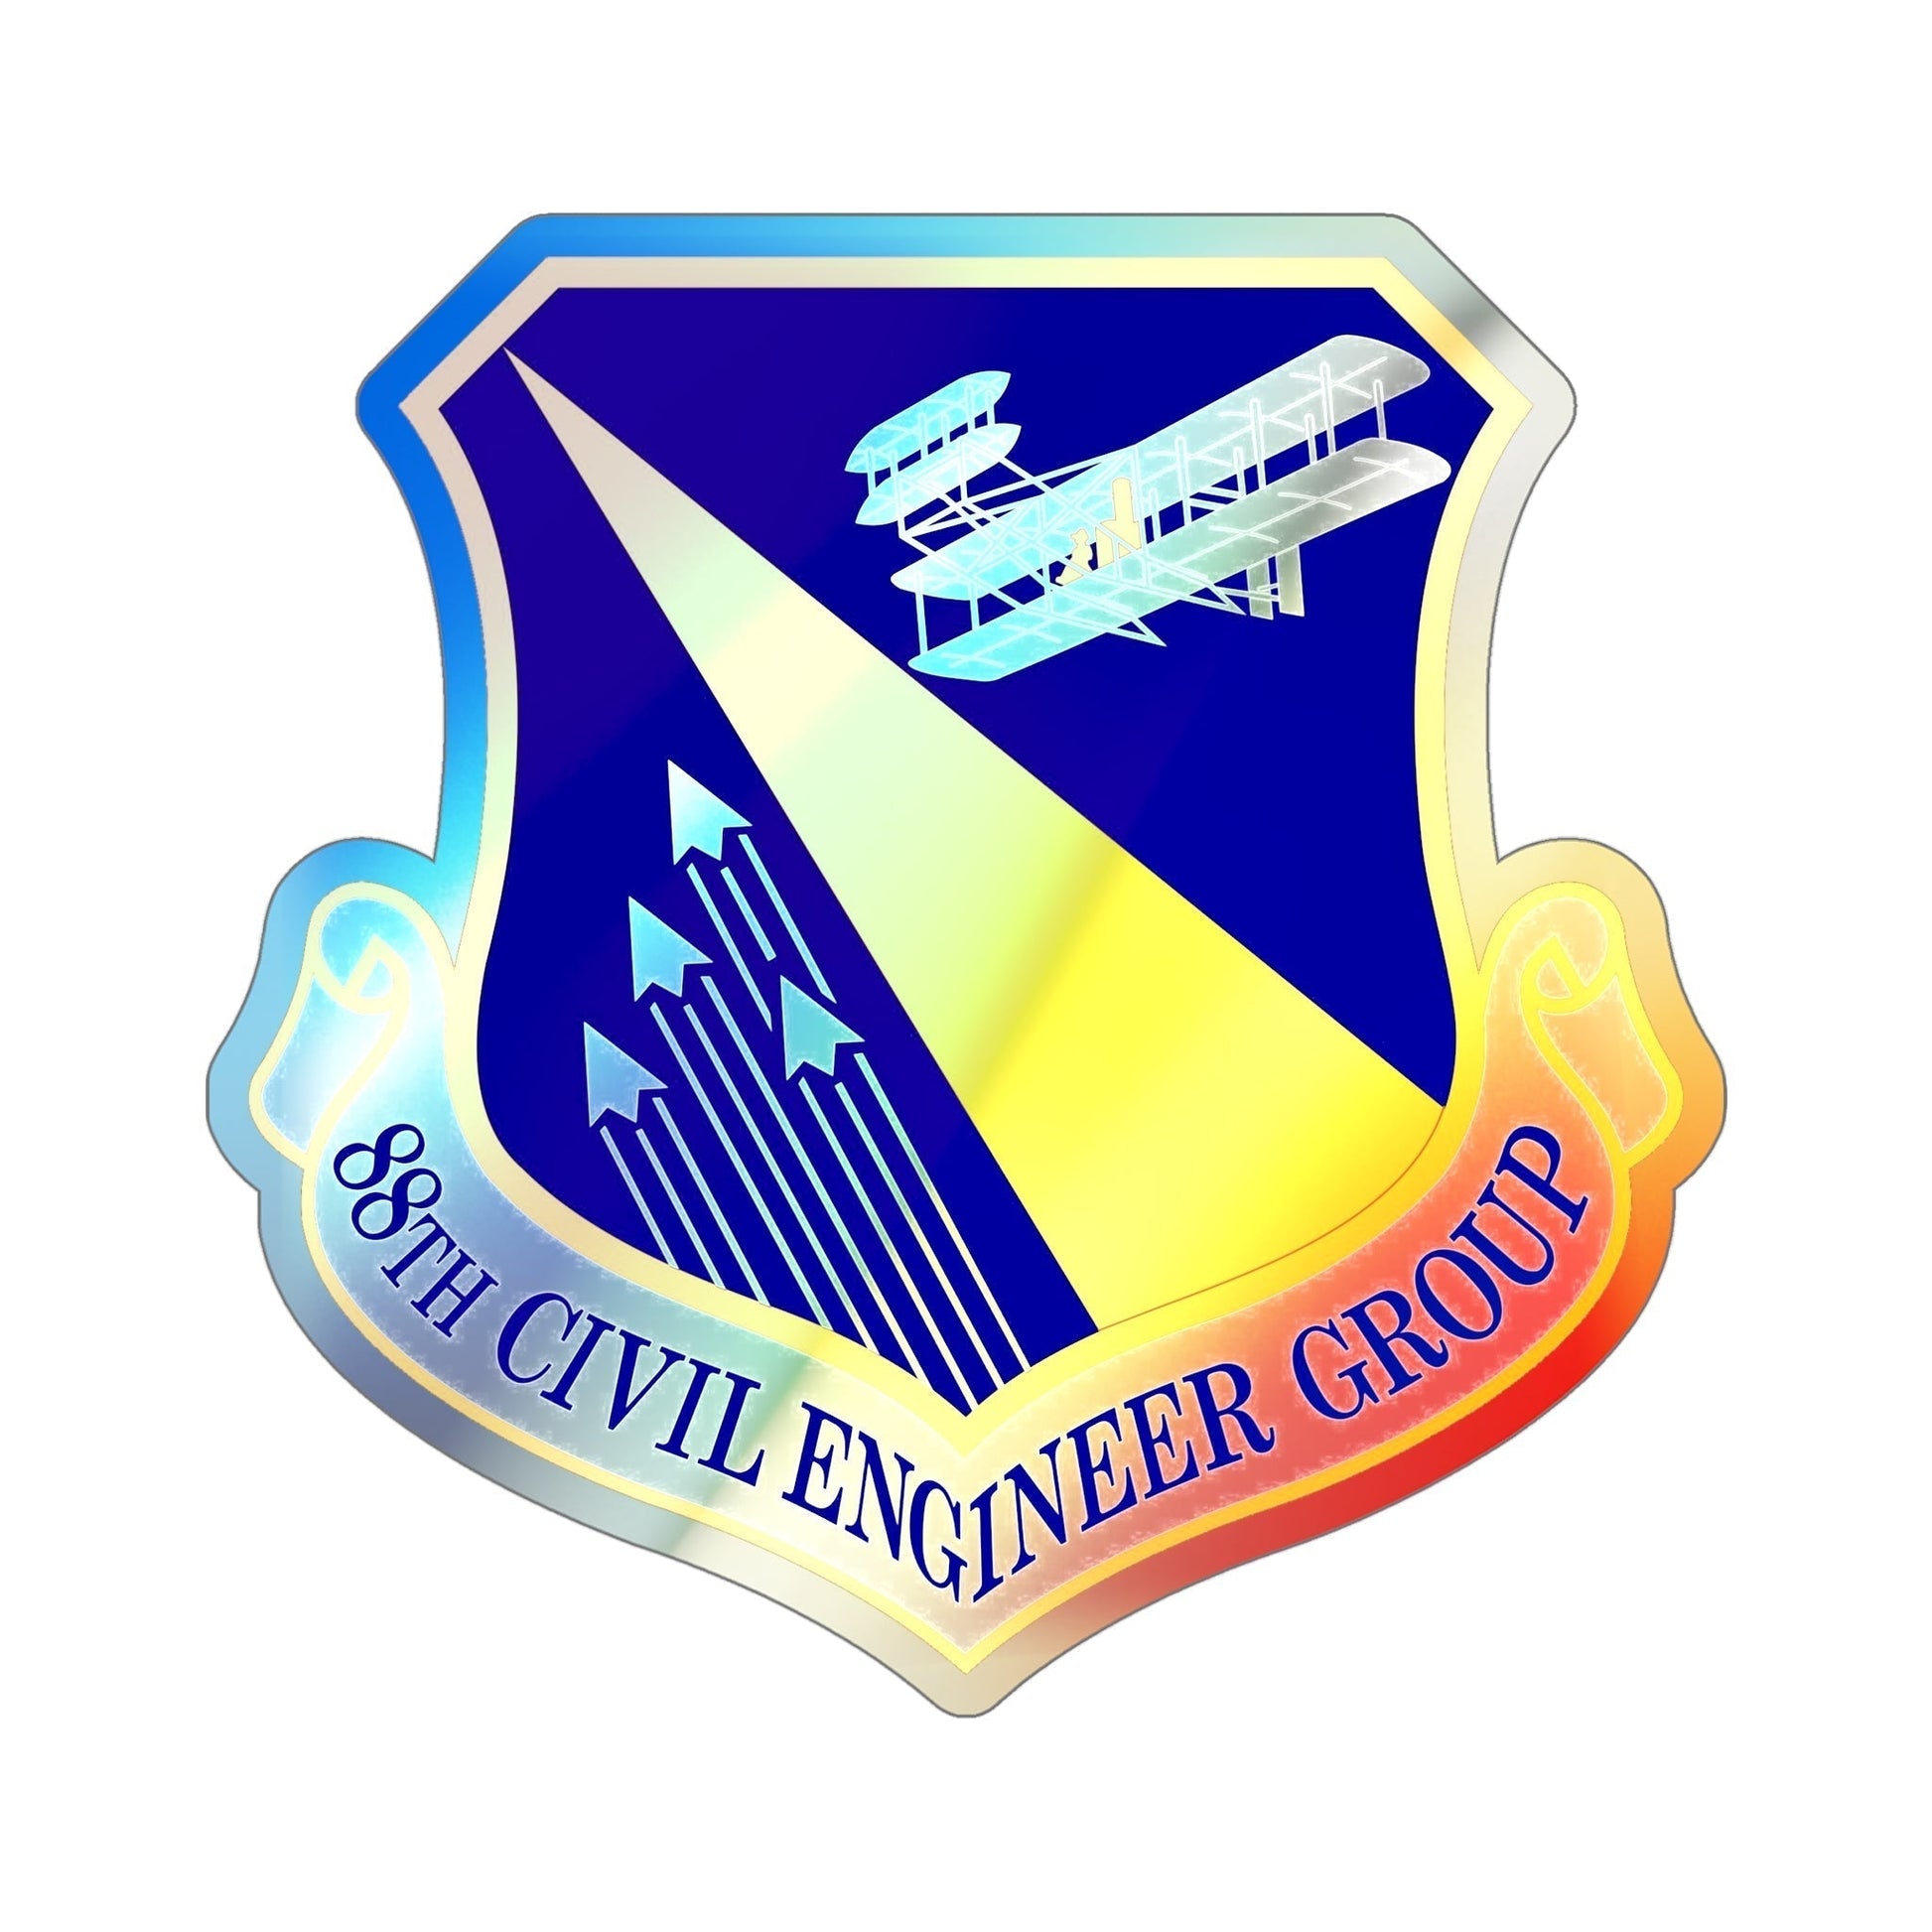 88 Civil Engineer Group AFMC (U.S. Air Force) Holographic STICKER Die-Cut Vinyl Decal-6 Inch-The Sticker Space